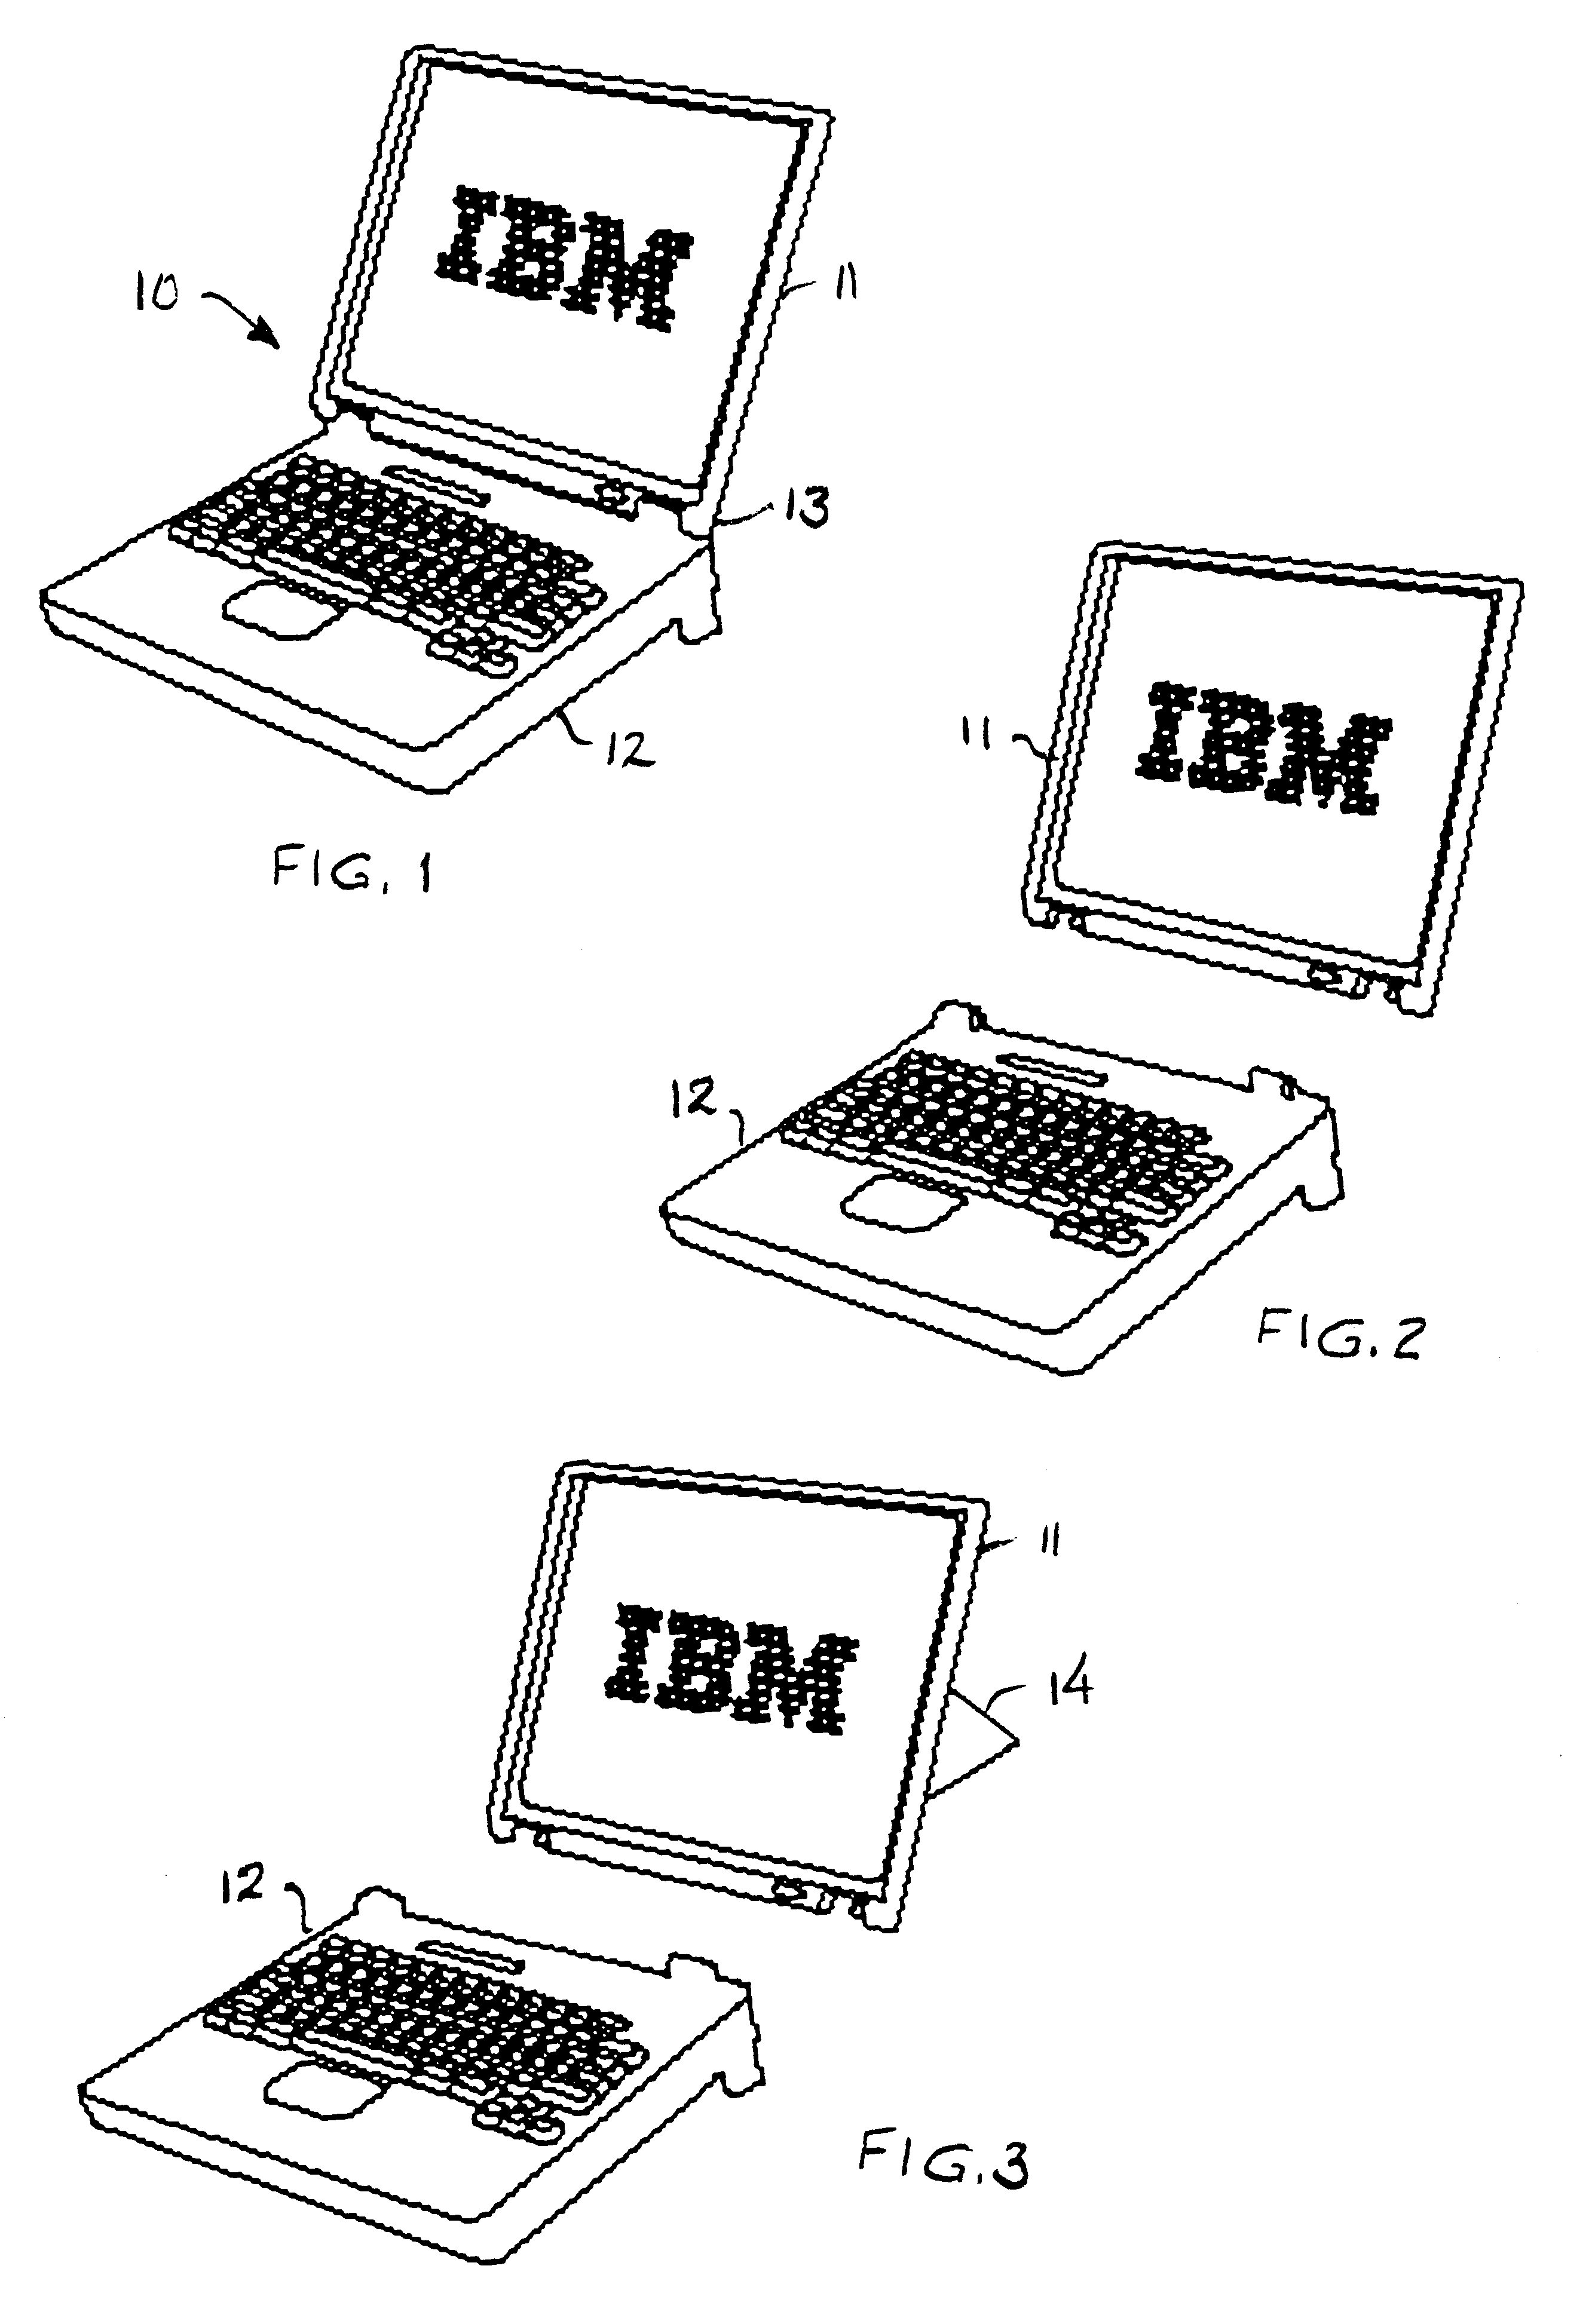 Detachable displays or portable devices